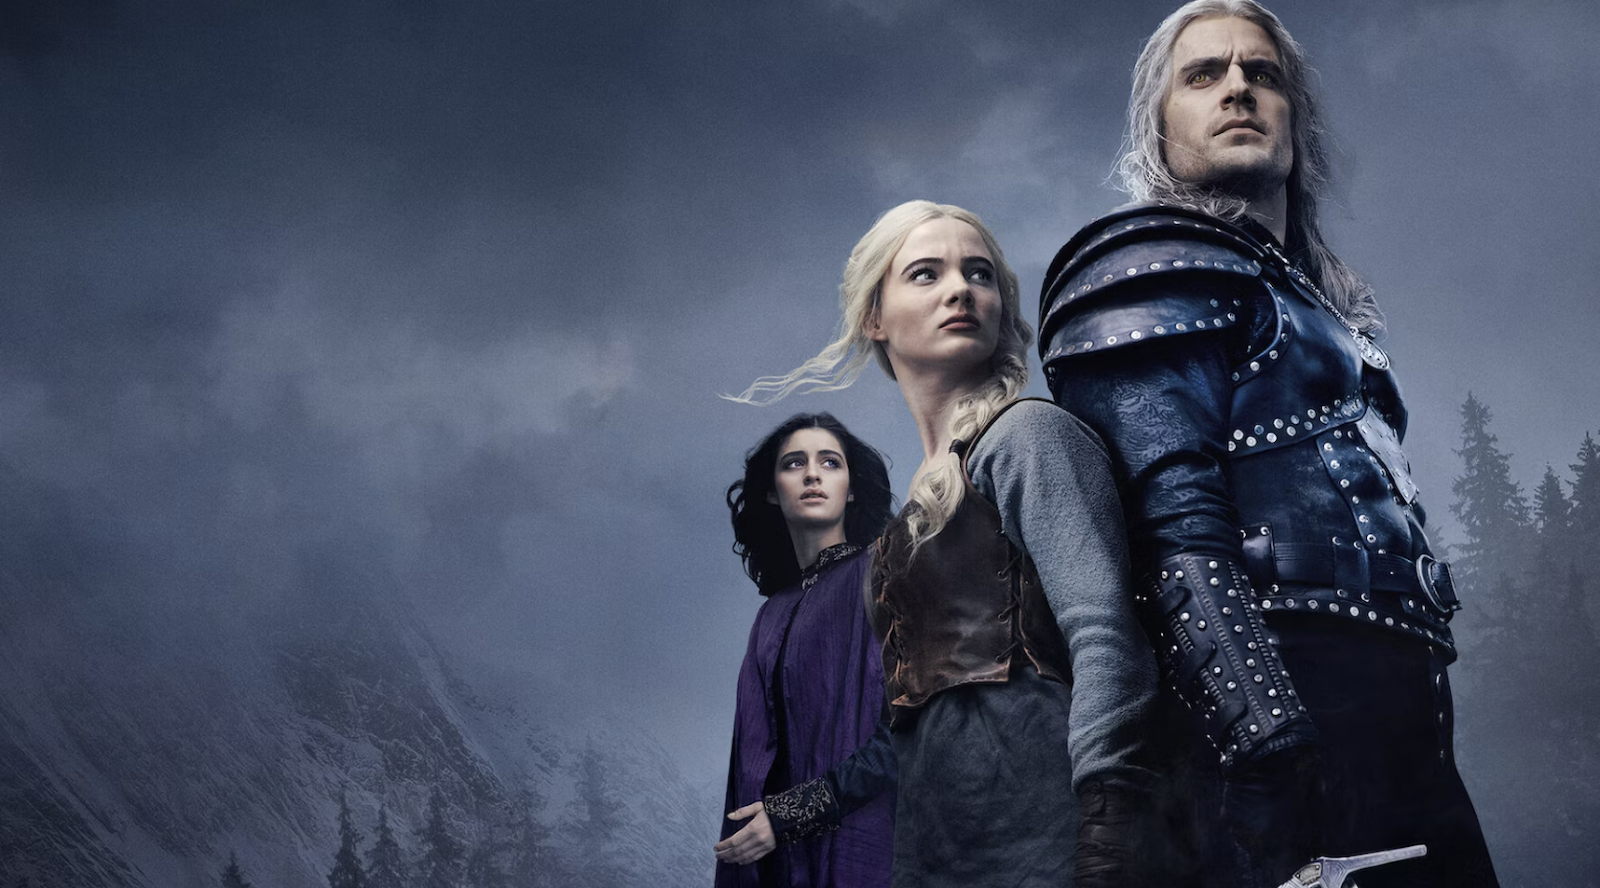 Geralt, Ciri, and Yennifer in front of clouds in Witcher poster